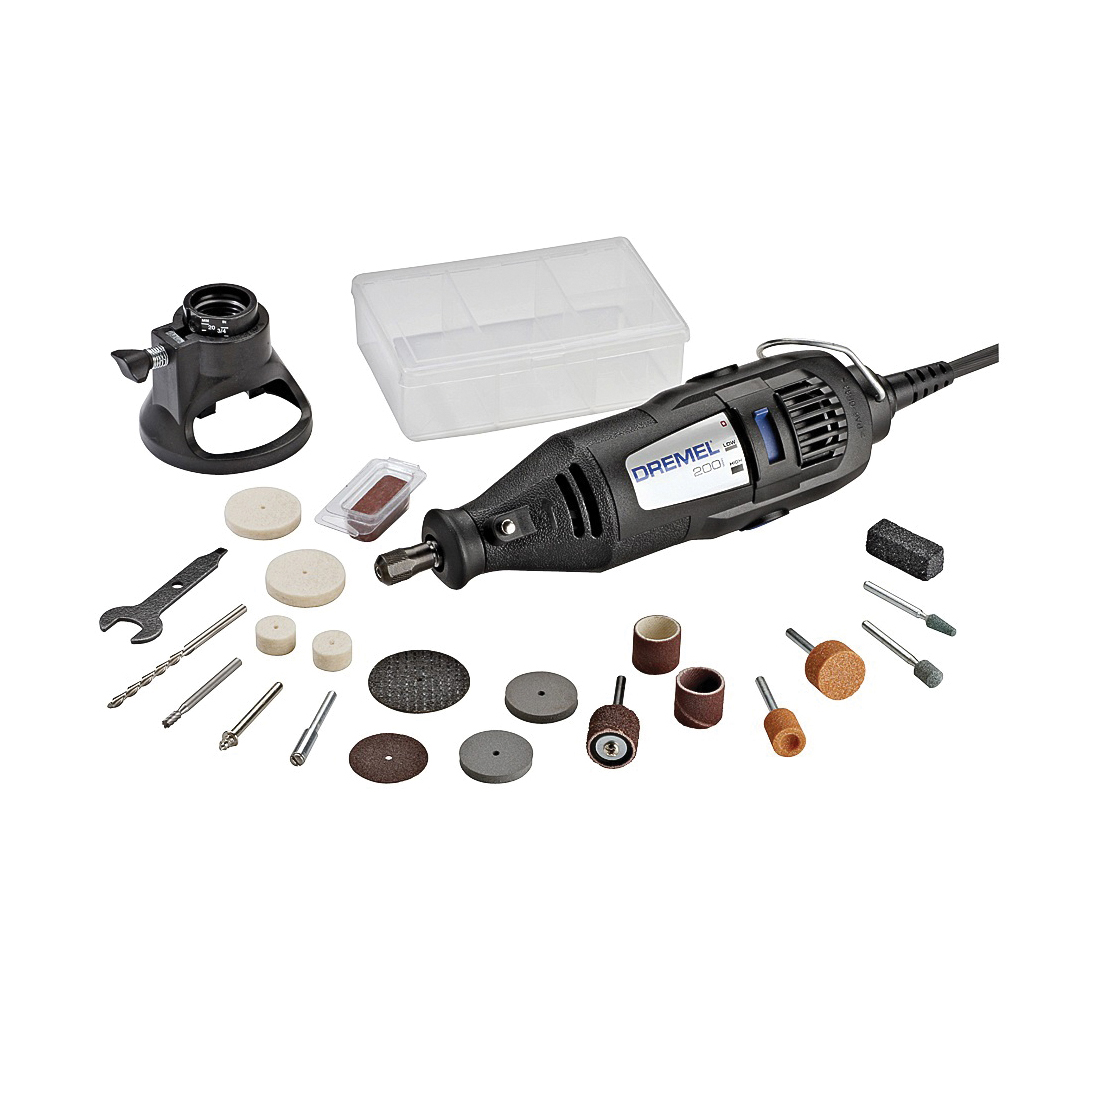 200-1/21 Rotary Tool Kit, 0.9 A, 1/8 in Chuck, Keyed Chuck, 2-Speed, 15,000 to 35,000 rpm Speed